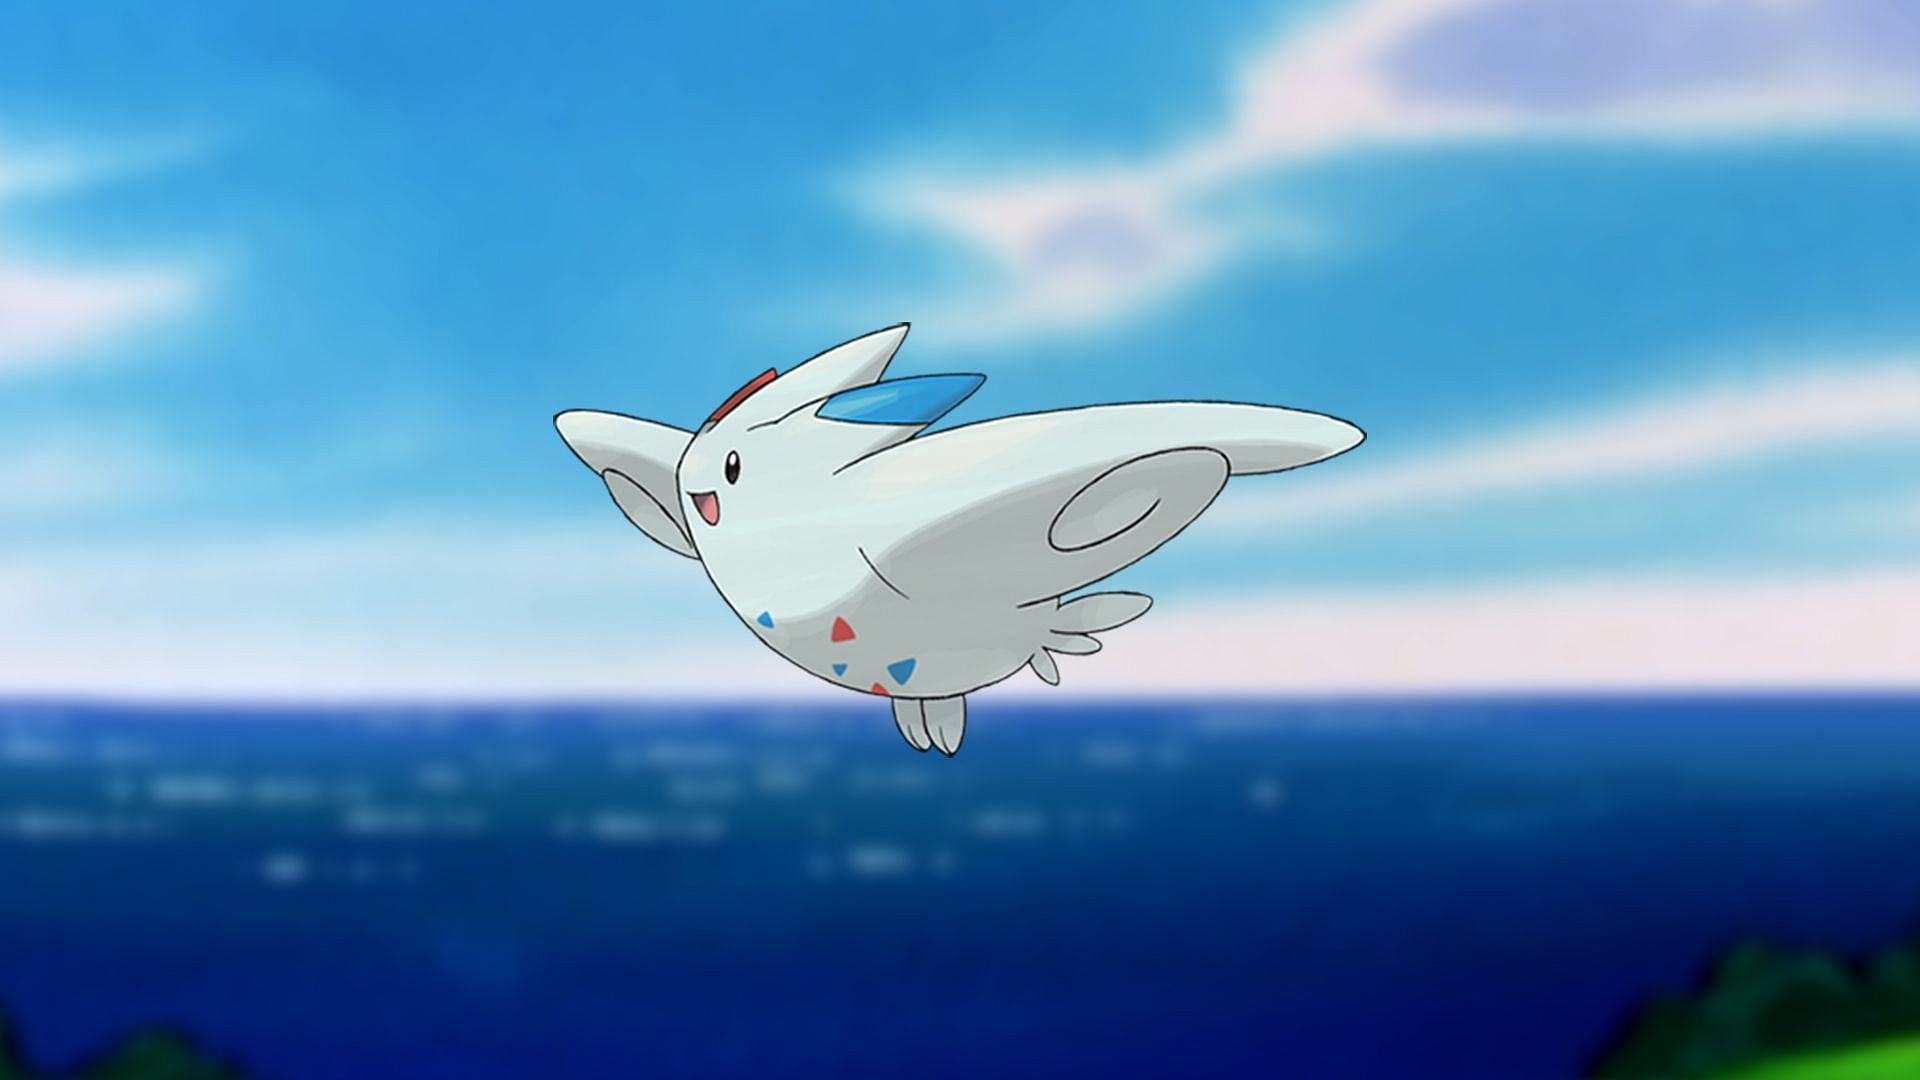 Togekiss as it appears in the anime (Image via The Pokemon Company)